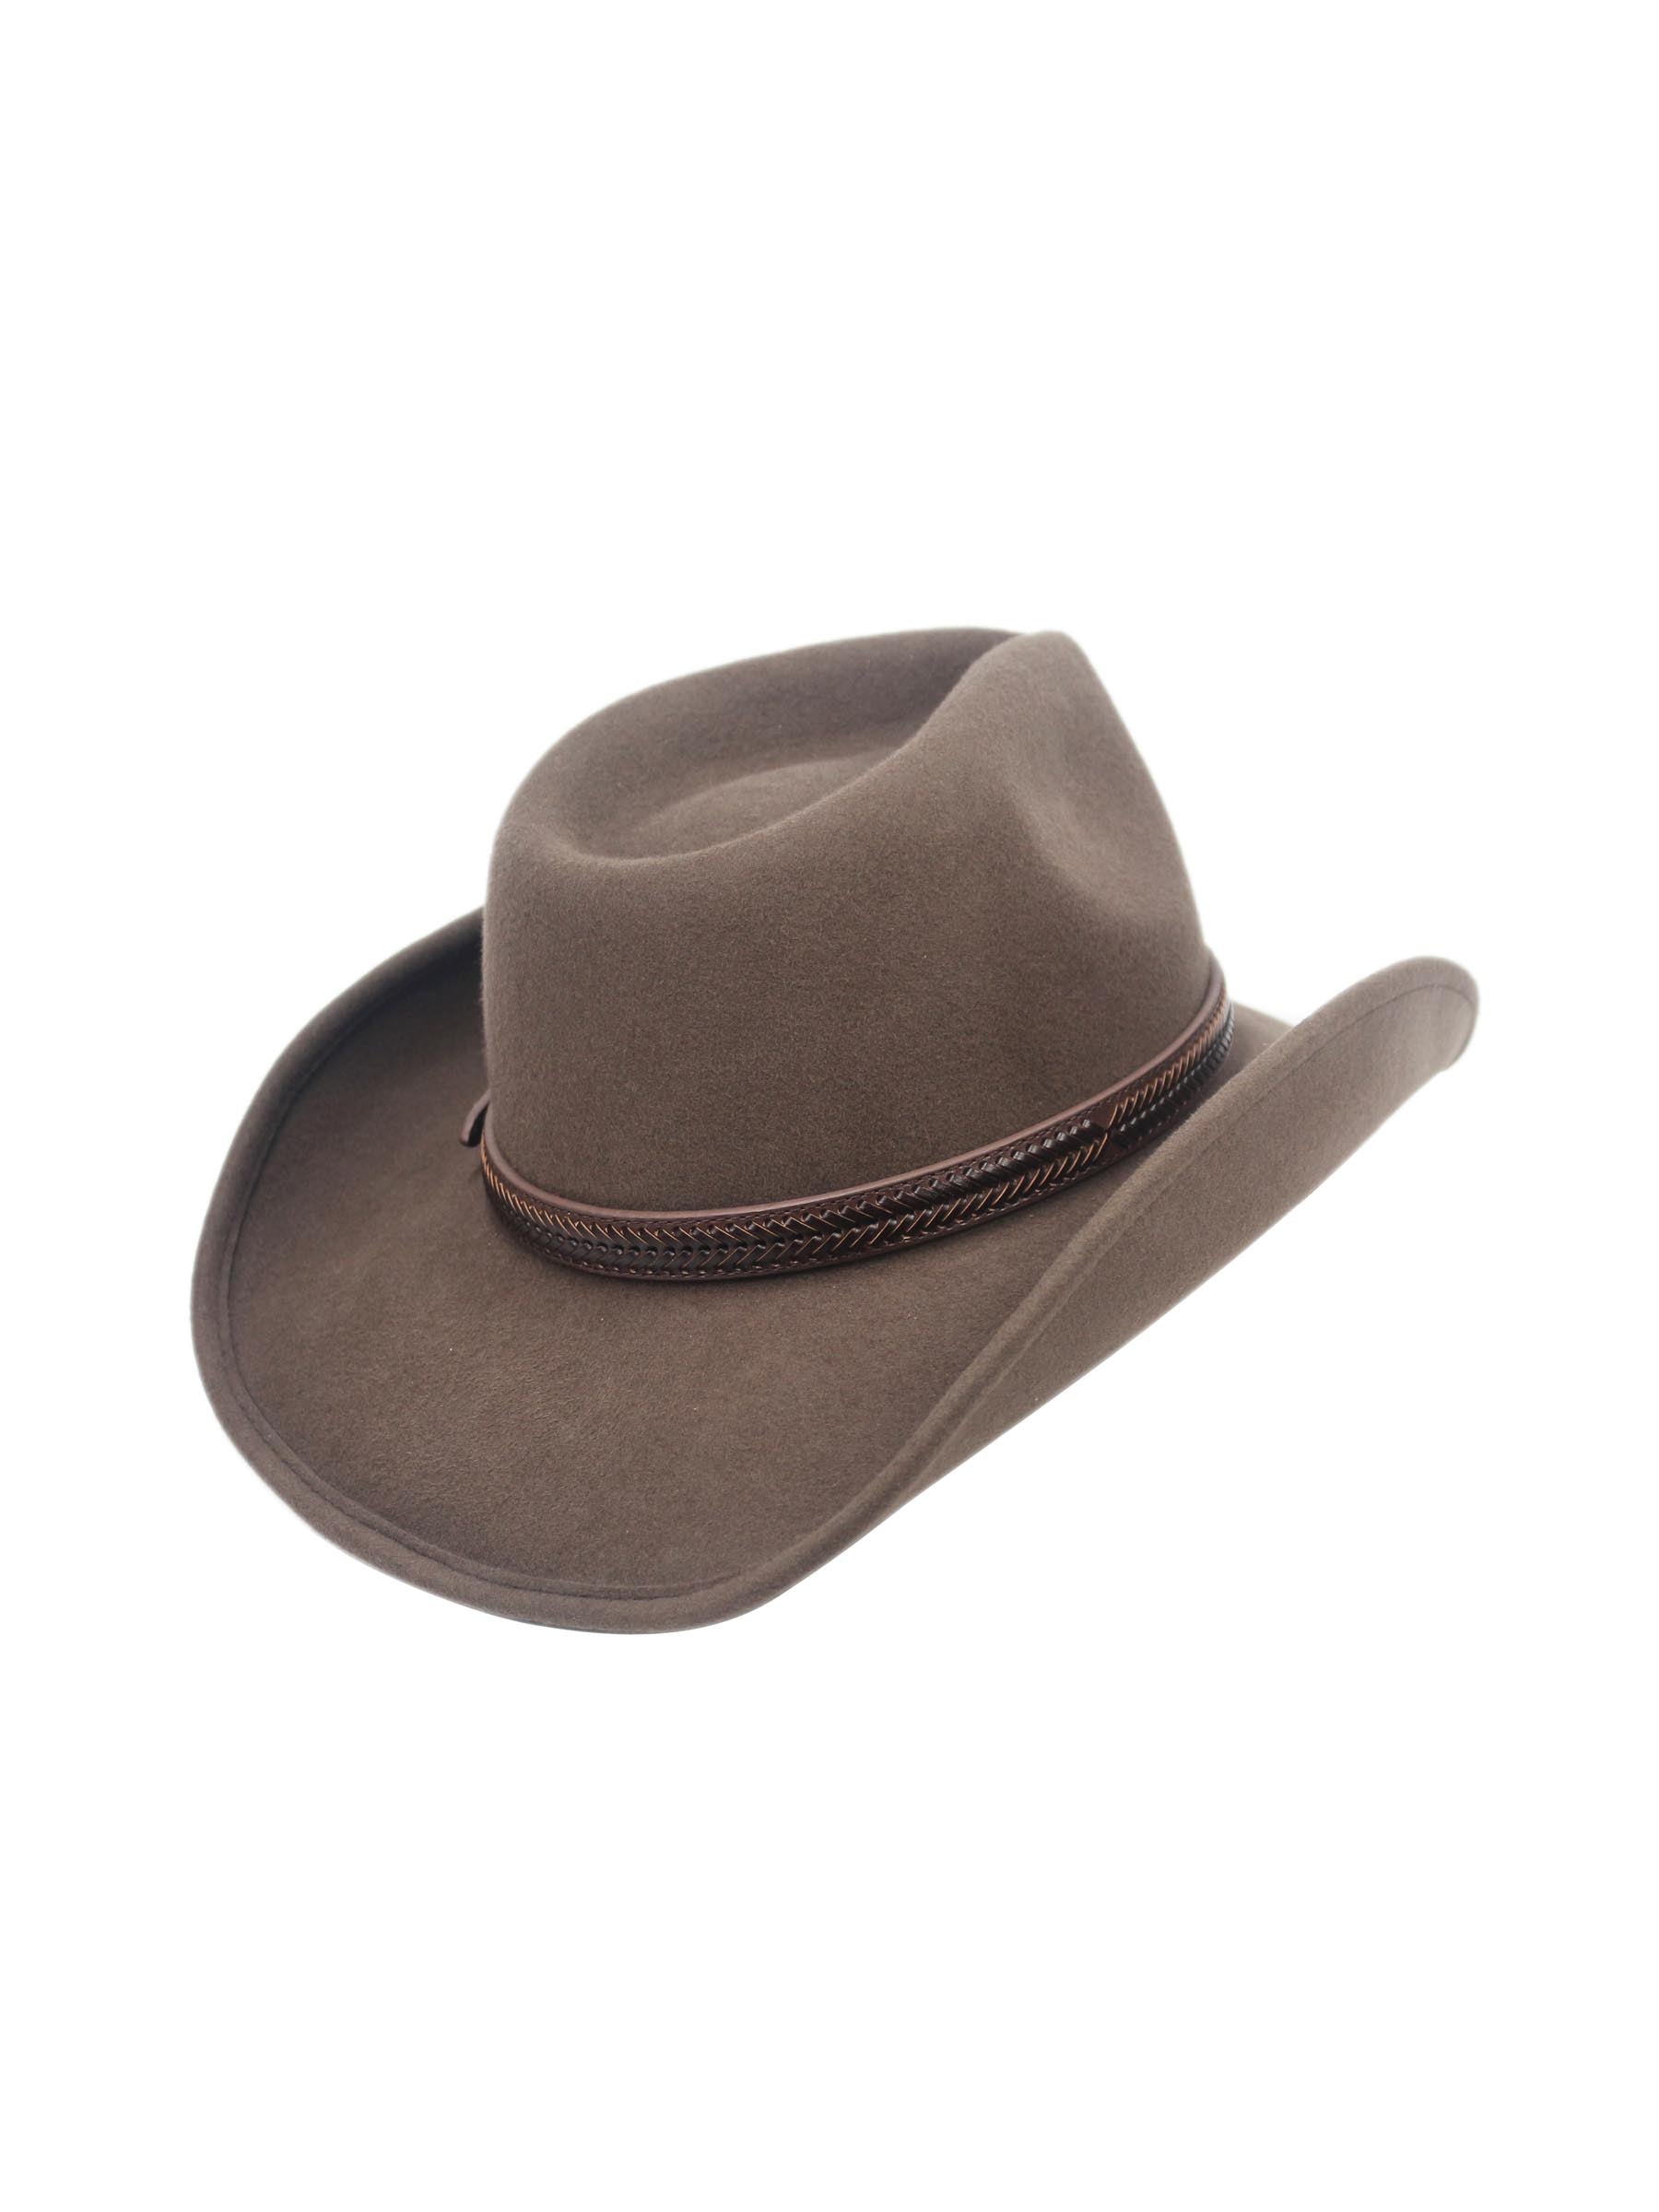 West Hat Band - Cowboy Hat Band - Brown & White